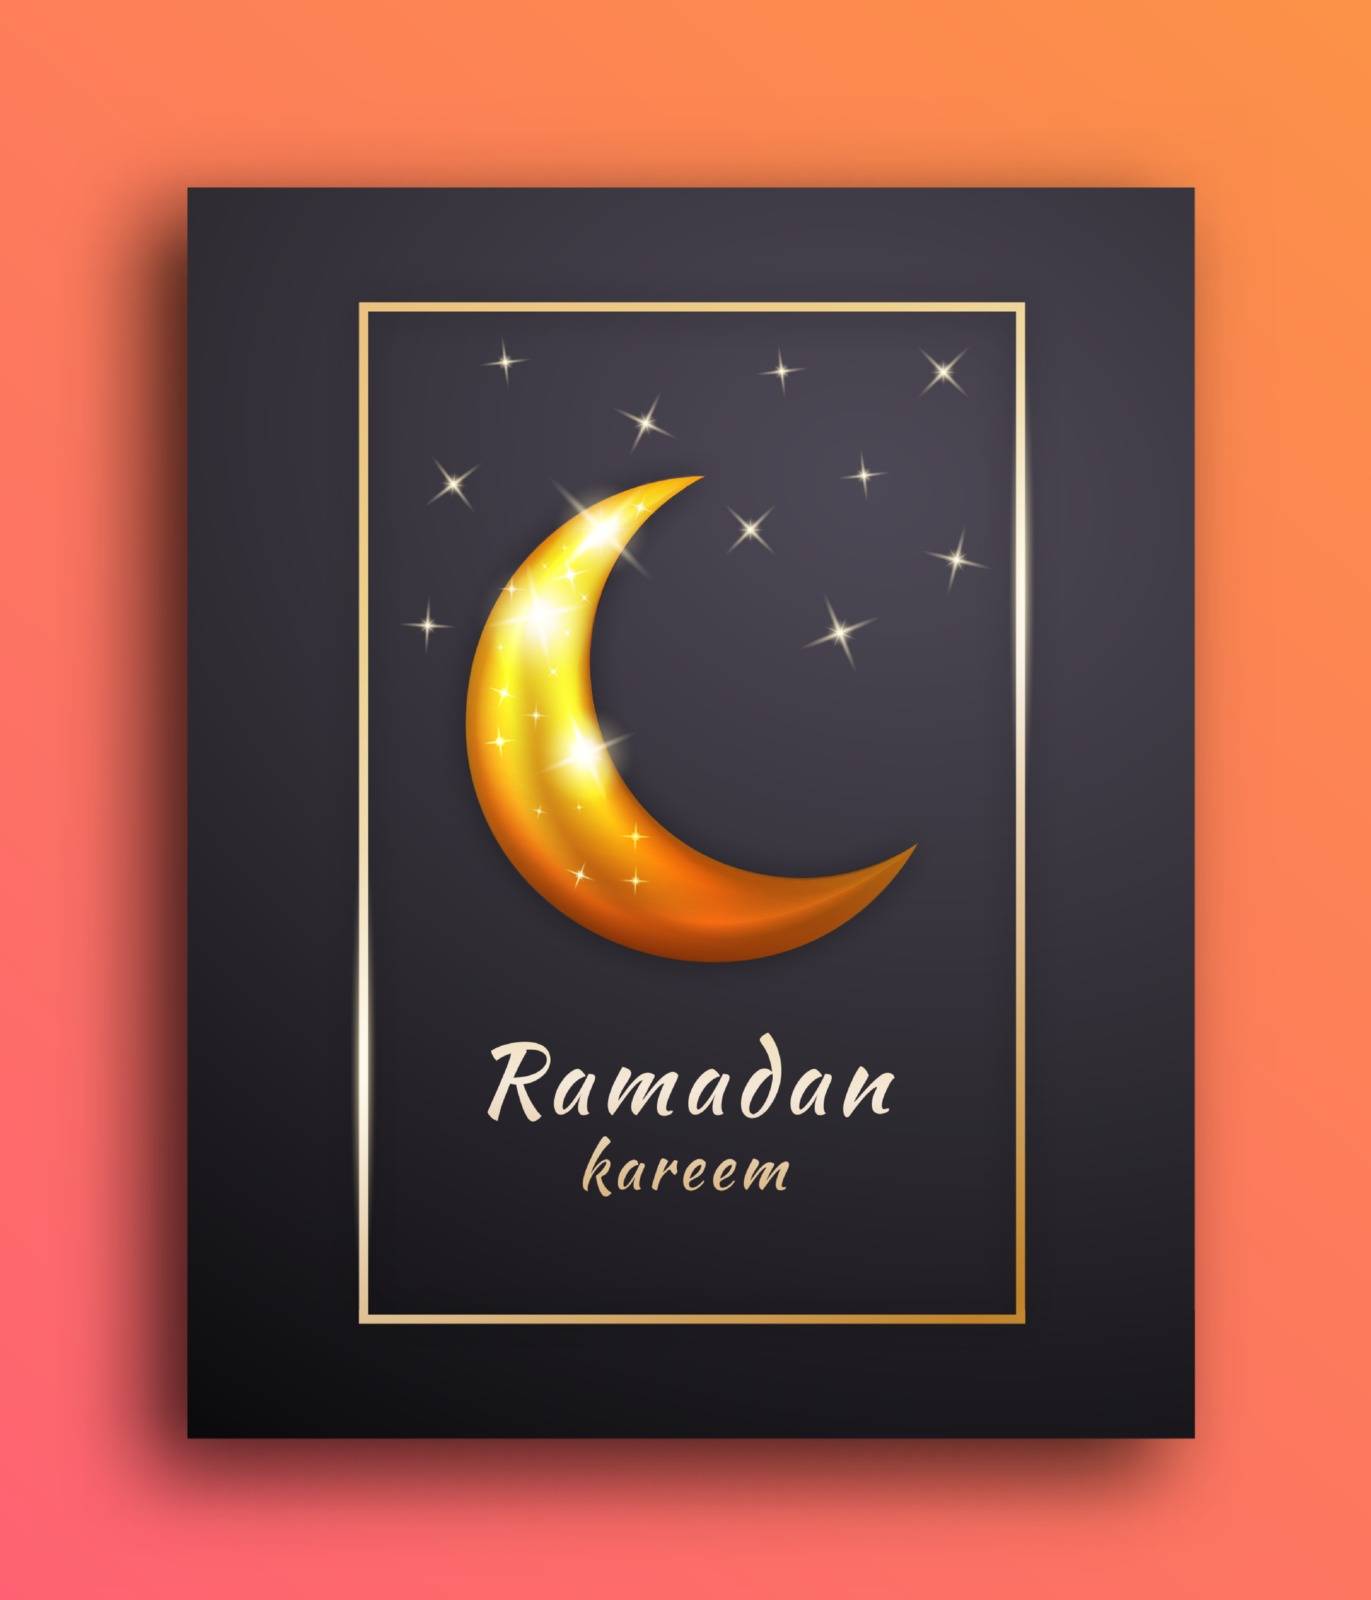 Background Frame of Ramadan Mubarak with the Moon and Shining Stars to Celebrate and Welcome the Month of Ramadan by templator